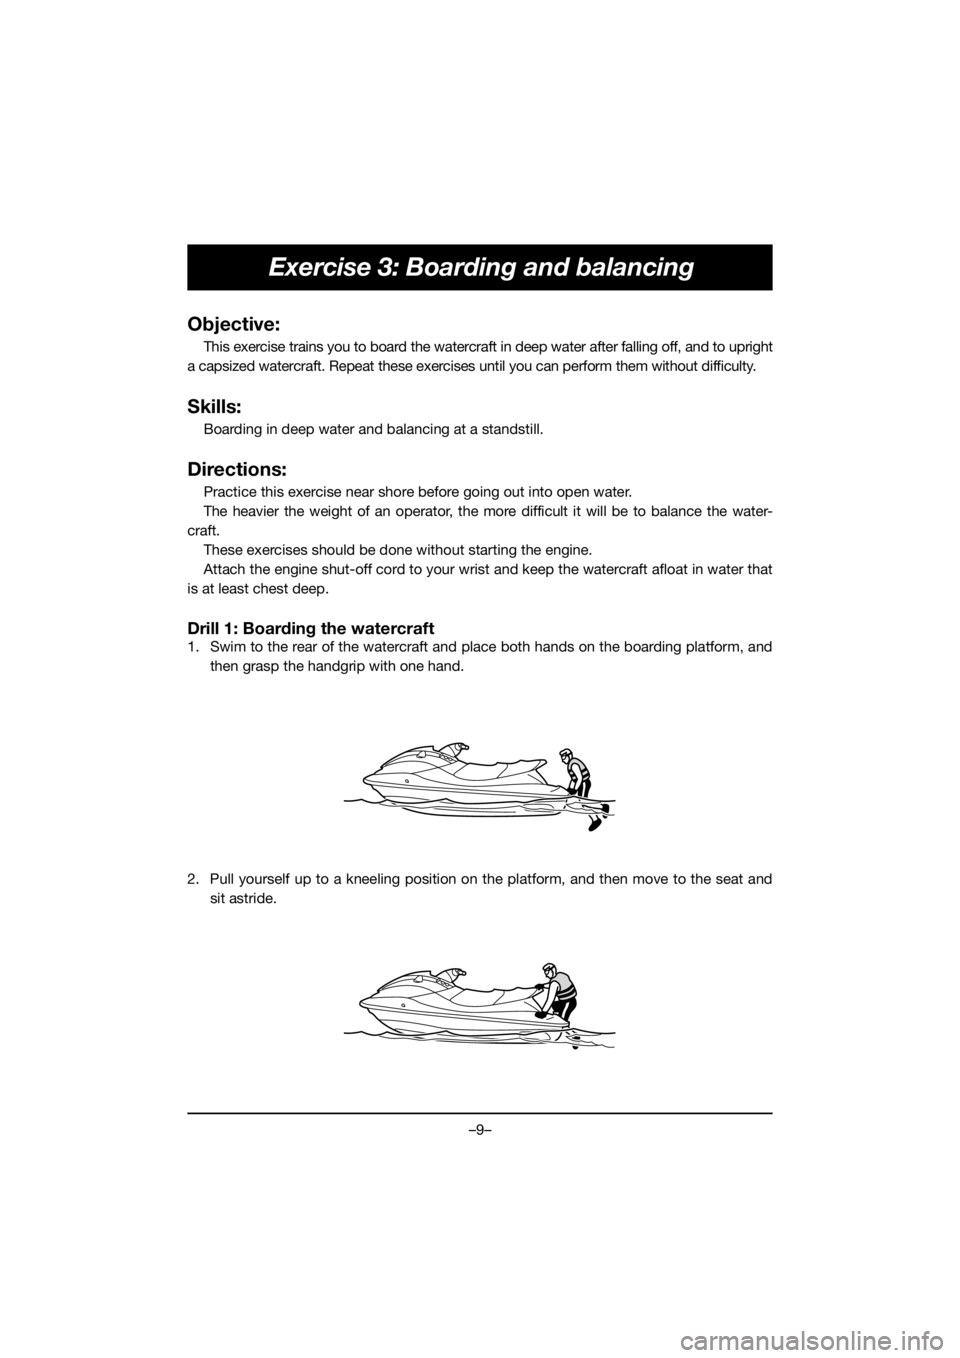 YAMAHA EXR 2019  Manuale de Empleo (in Spanish) –9–
Exercise 3: Boarding and balancing
Objective:
This exercise trains you to board the watercraft in deep water after falling off, and to upright
a capsized watercraft. Repeat these exercises unt